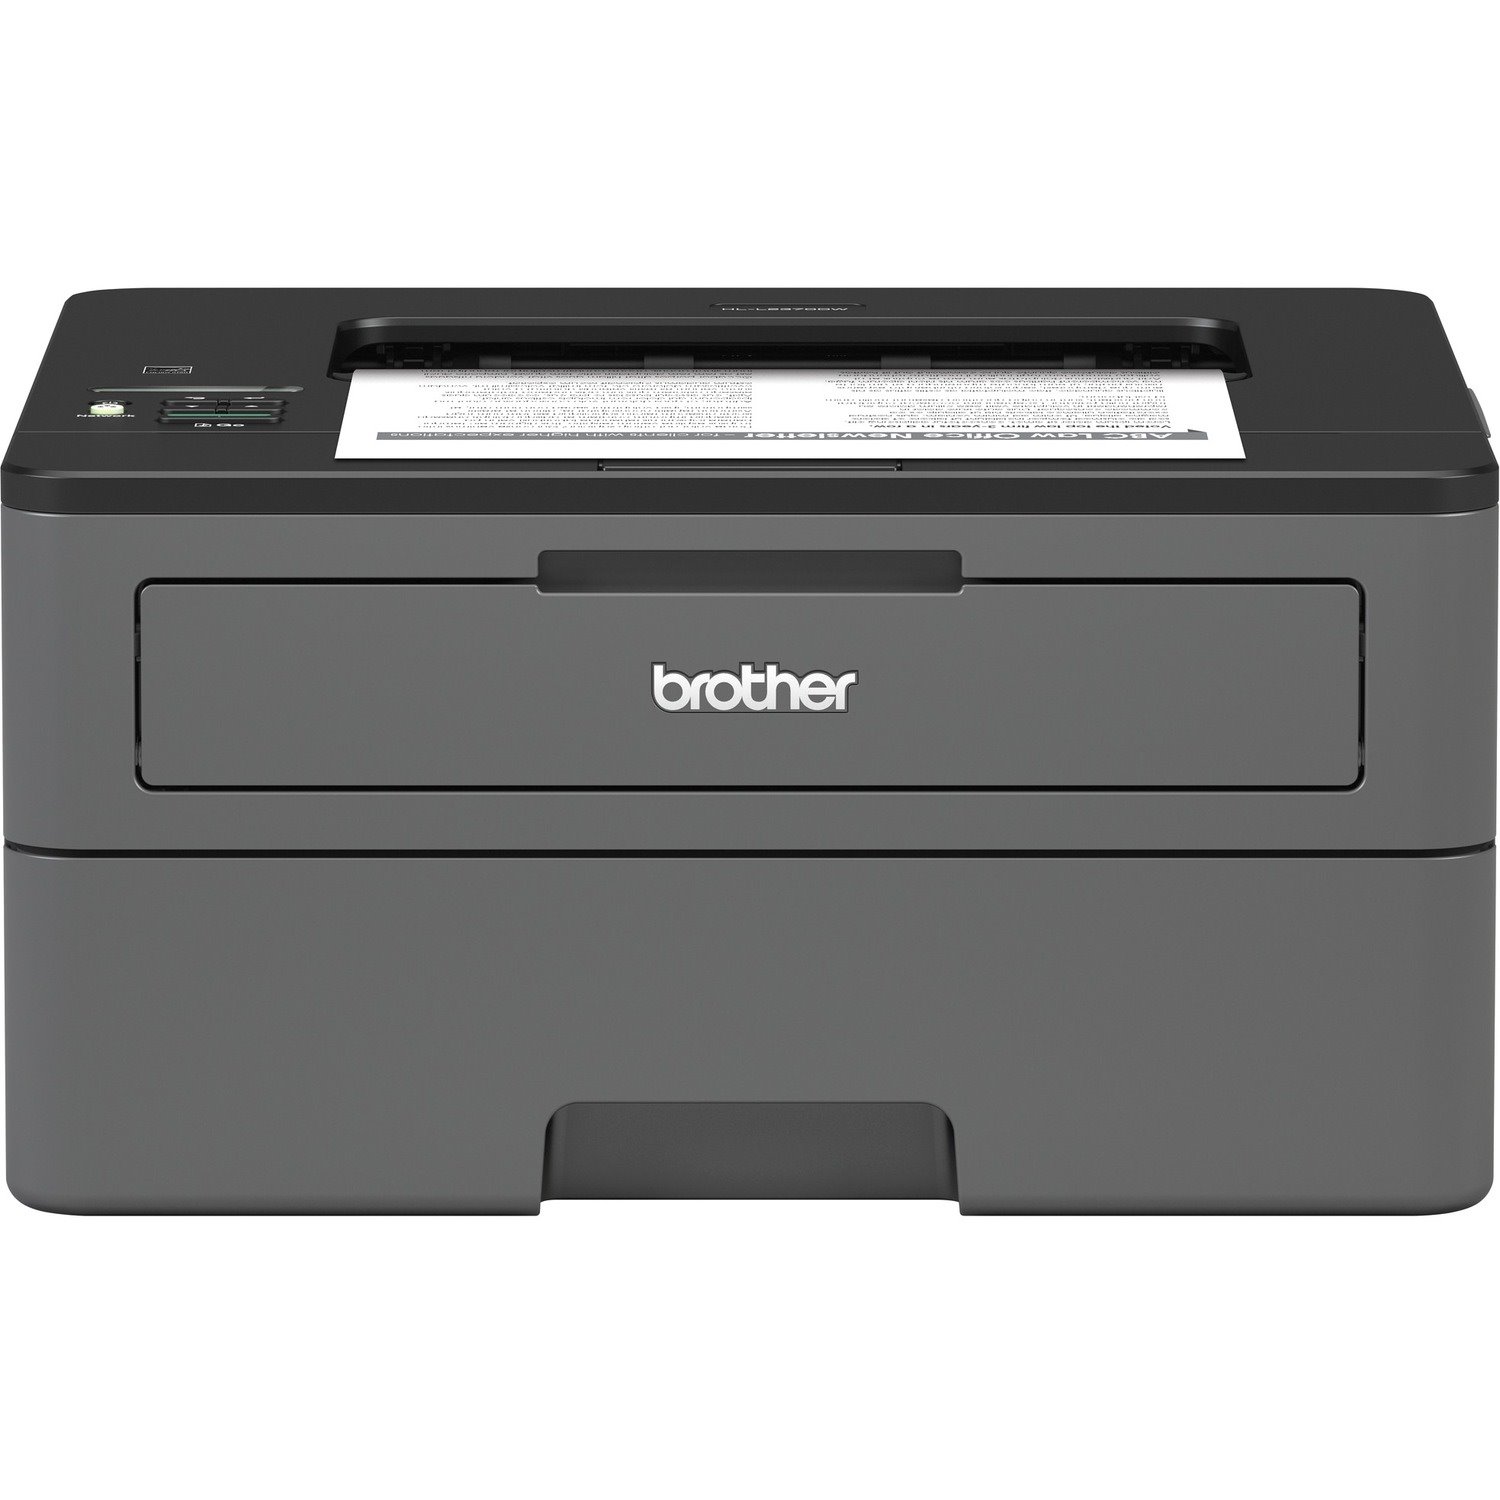 Brother HL-L2370DW Monochrome Compact Laser Printer with Wireless & Ethernet and Duplex Printing